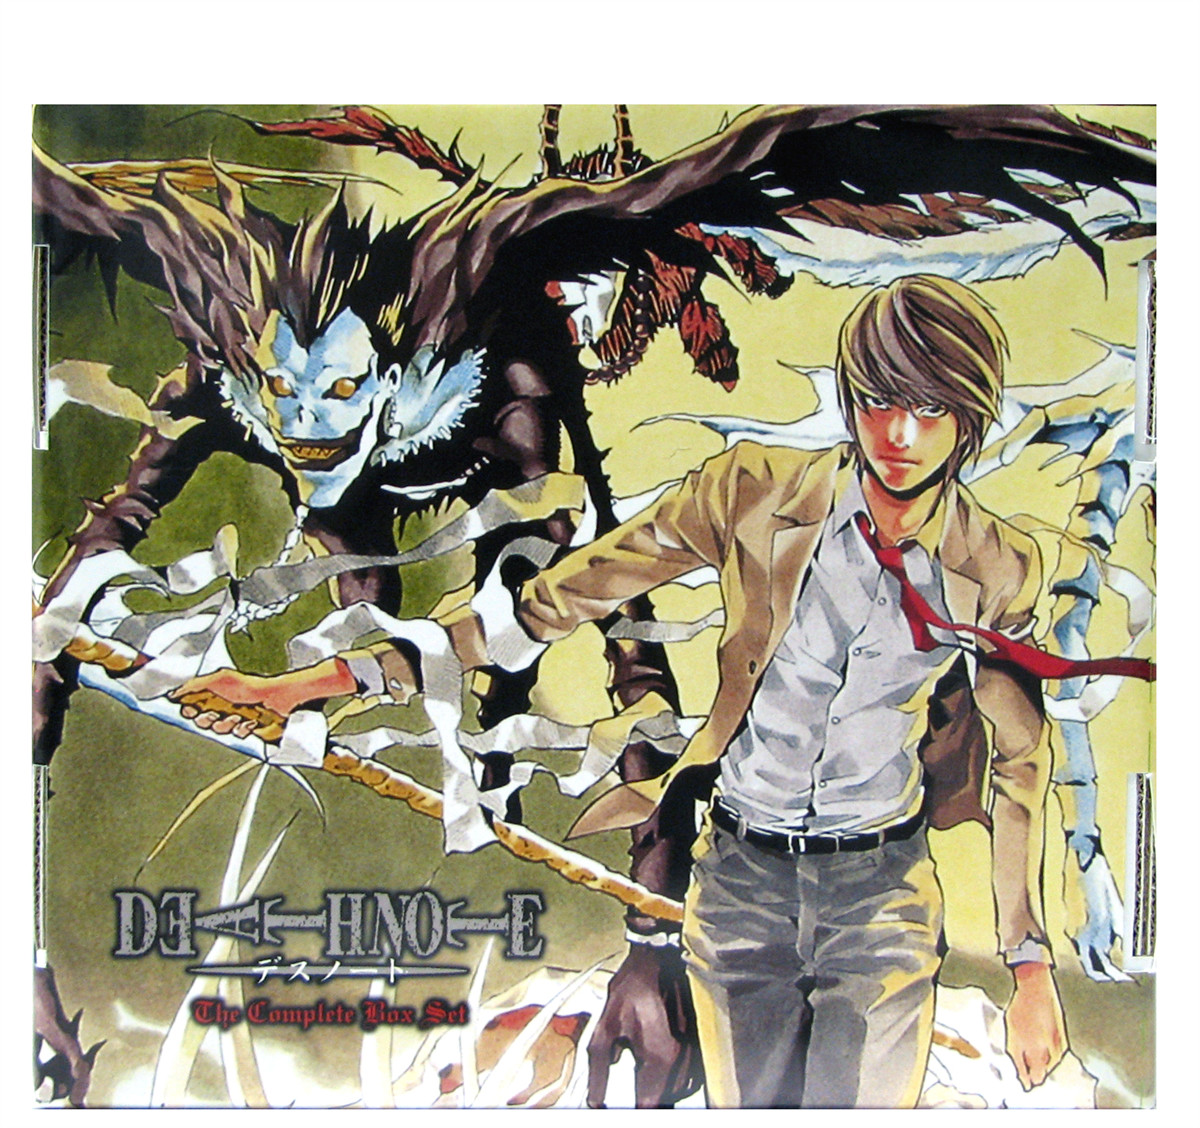 The Death Note Box Set Is On Sale So You'll Take This Manga And Read It